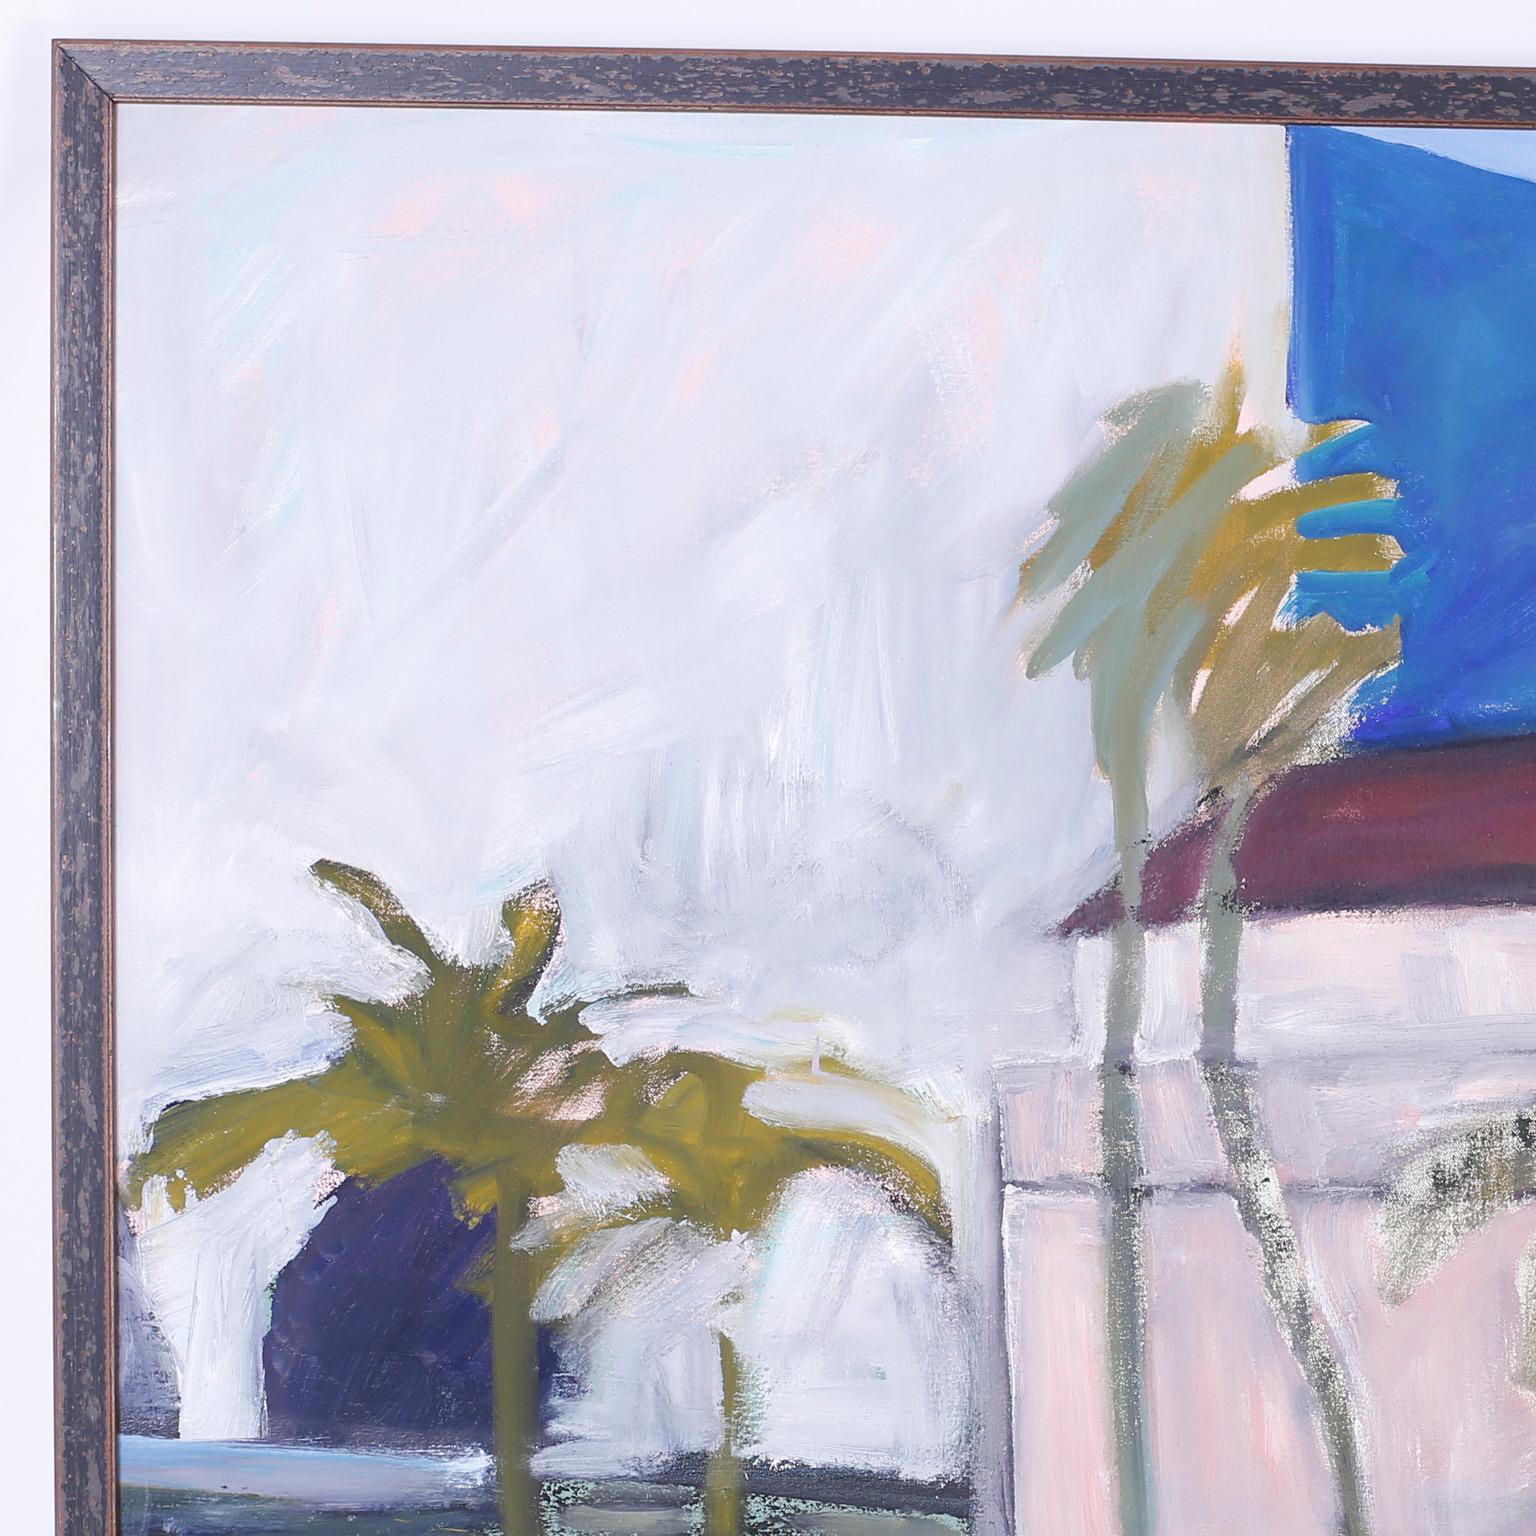 Mid-Century Modernist oil painting on canvas with a disciplined Minimalist style contrasting geometric forms with organic blowing palm trees and reflective pond.